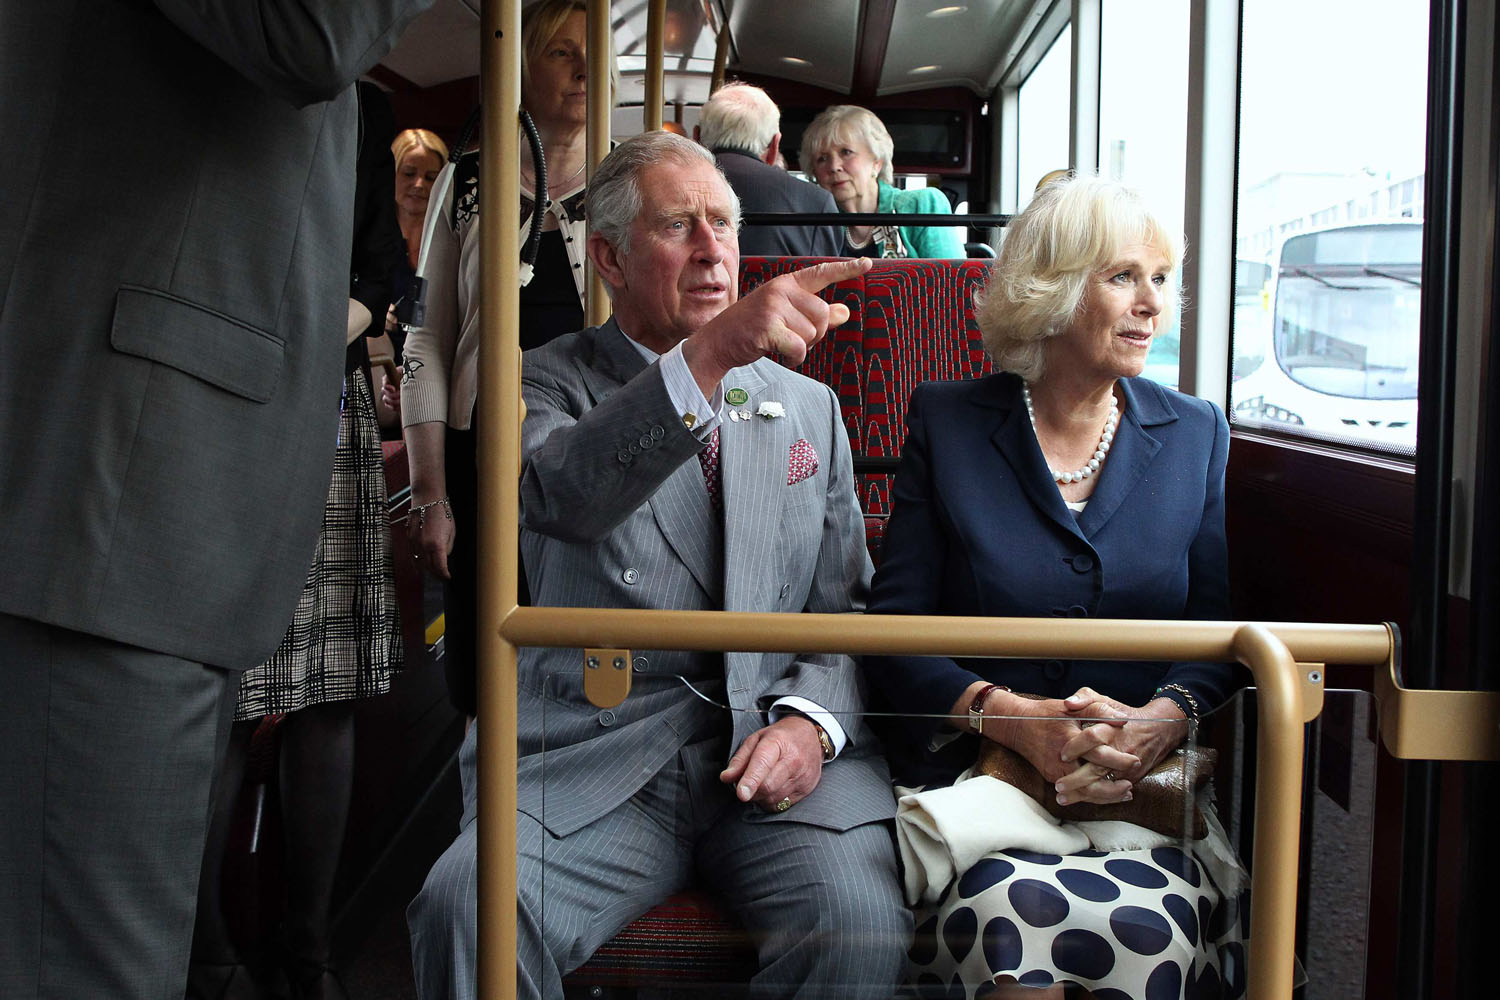 June 25, 2013. Britain's Prince Charles and his wife Camilla, Duchess of Cornwall take a short ride on a bus during their visit to the Wrightbus factory in Ballymena, Northern Ireland.